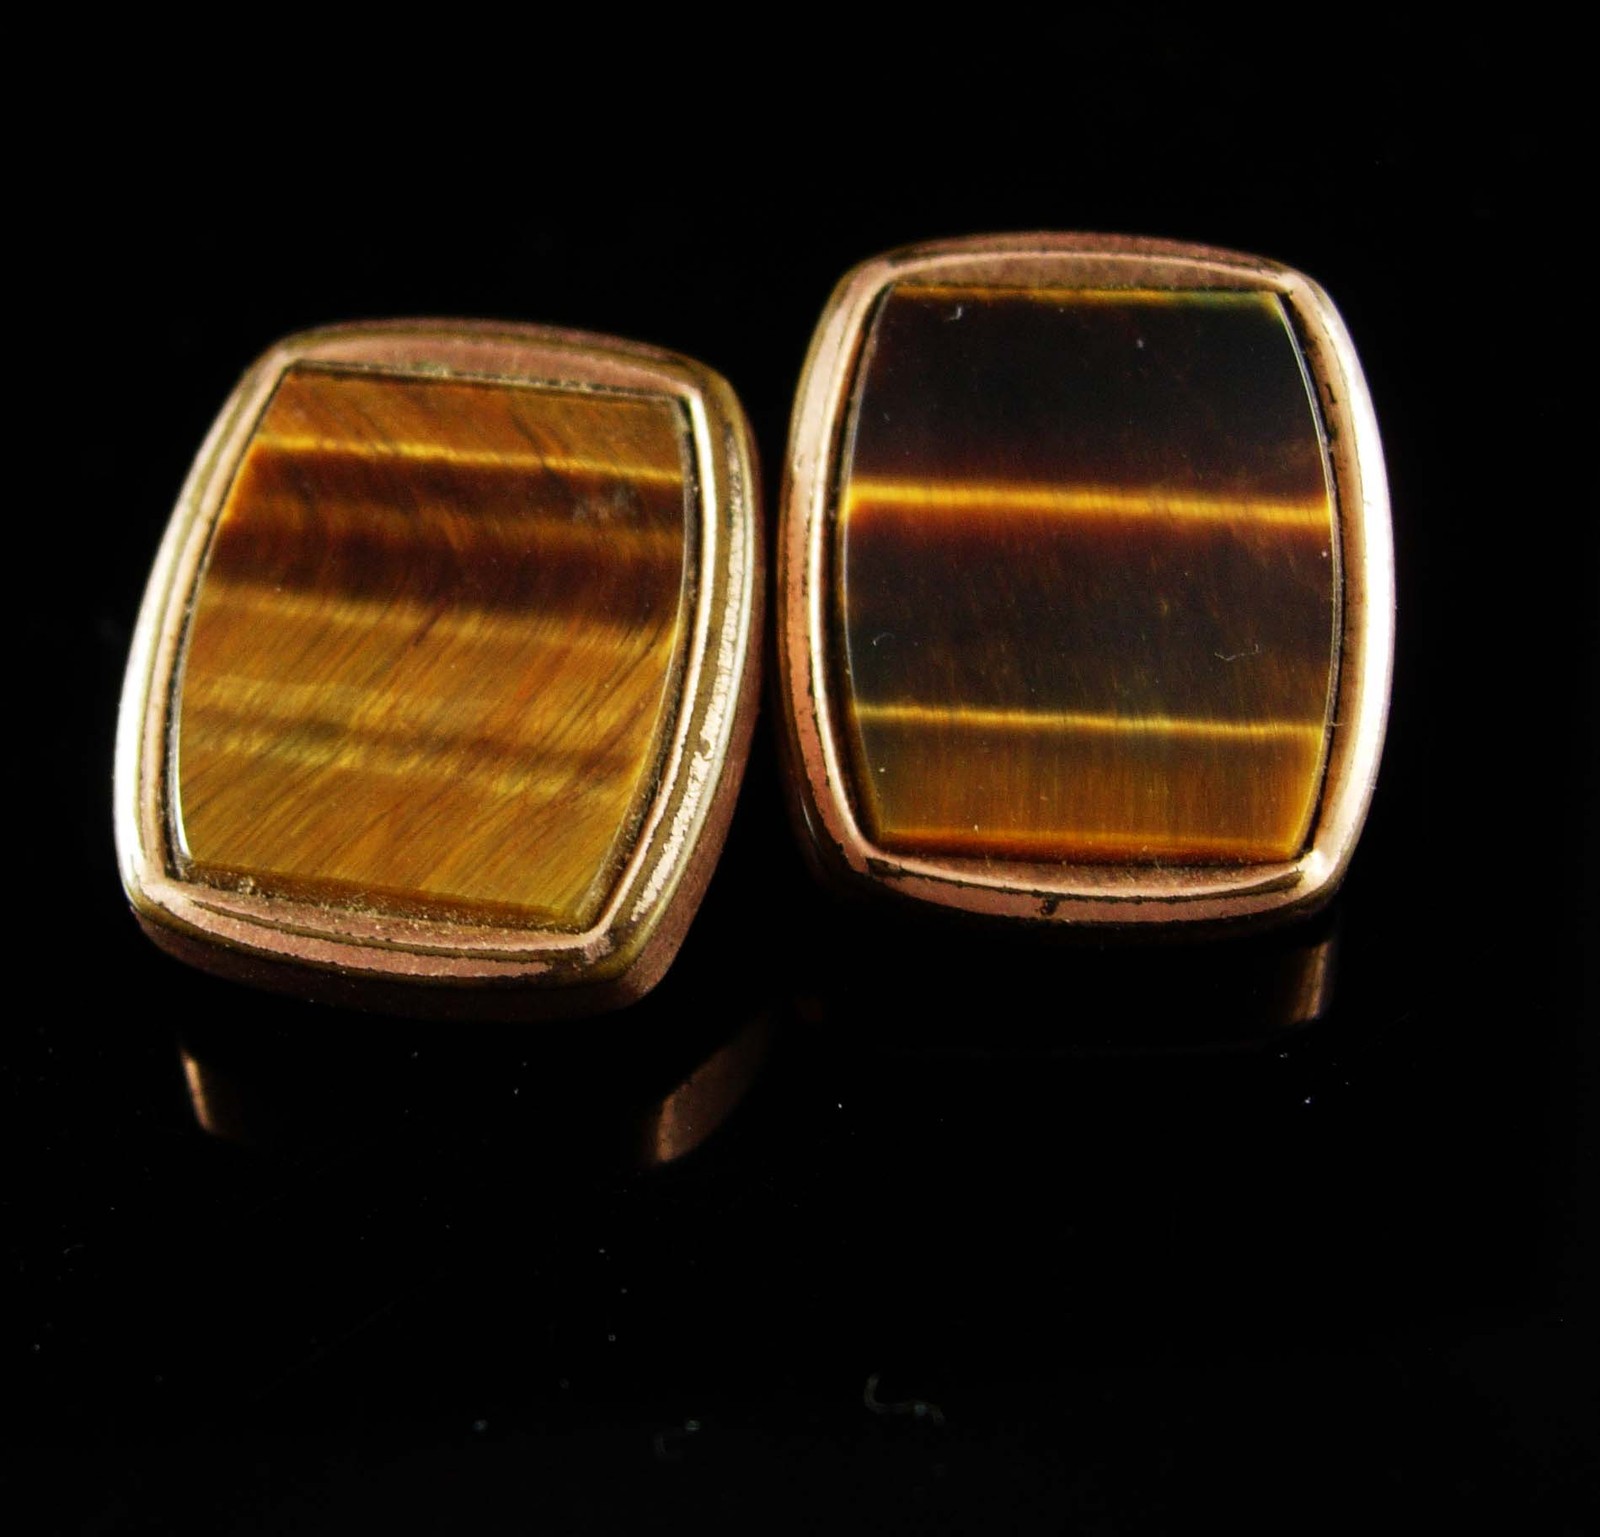 1880s Victorian Tigereye Cufflinks Antique gold rose gold plate Sleeve Accessory - $125.00